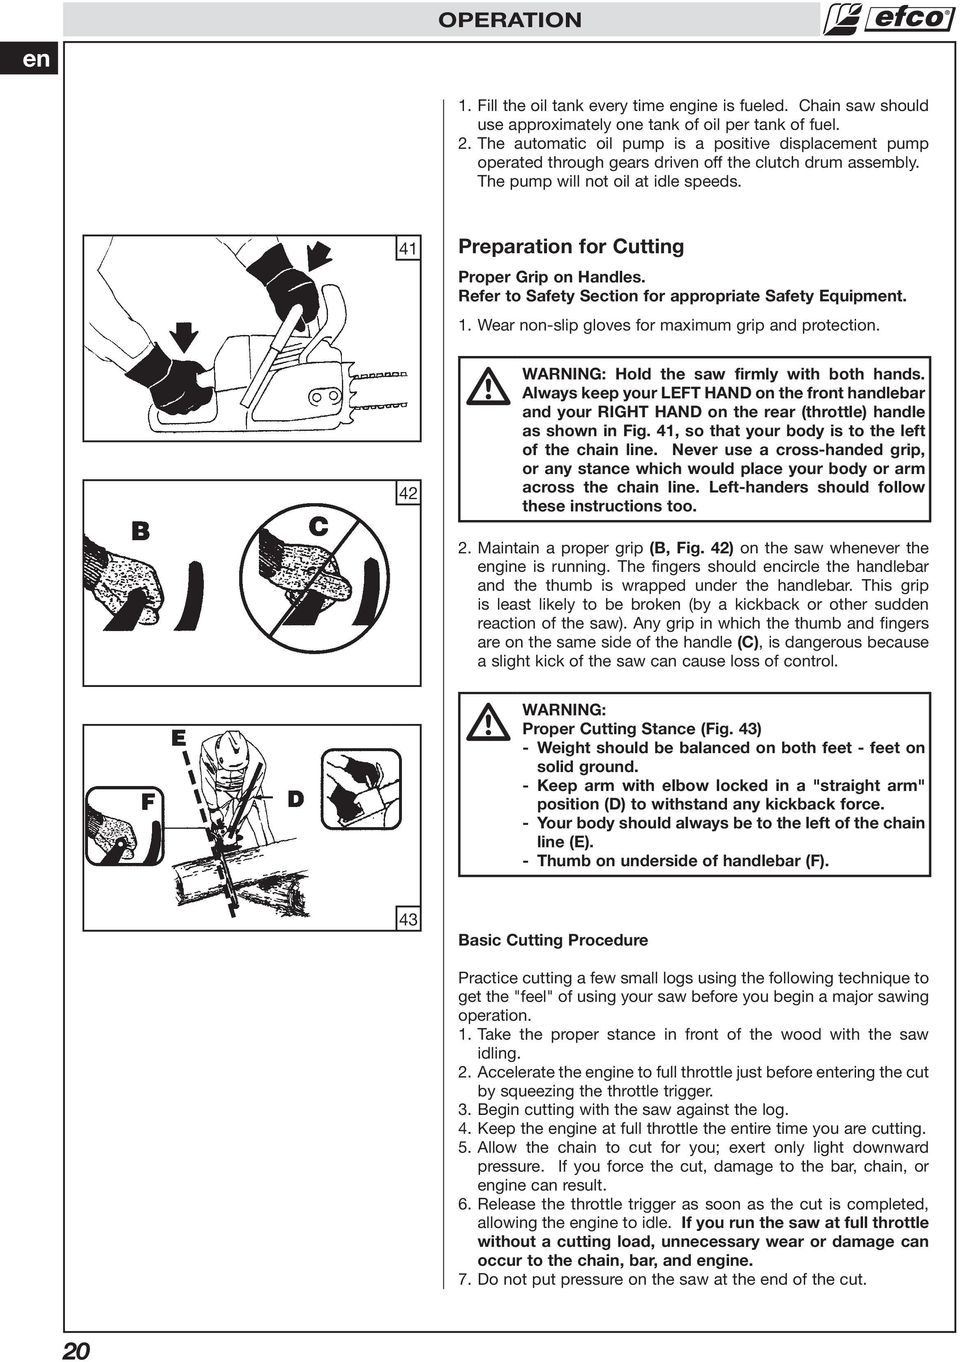 41 Preparation for Cutting Proper Grip on Handles. Refer to Safety Section for appropriate Safety Equipment. 1. Wear non-slip gloves for maximum grip and protection.